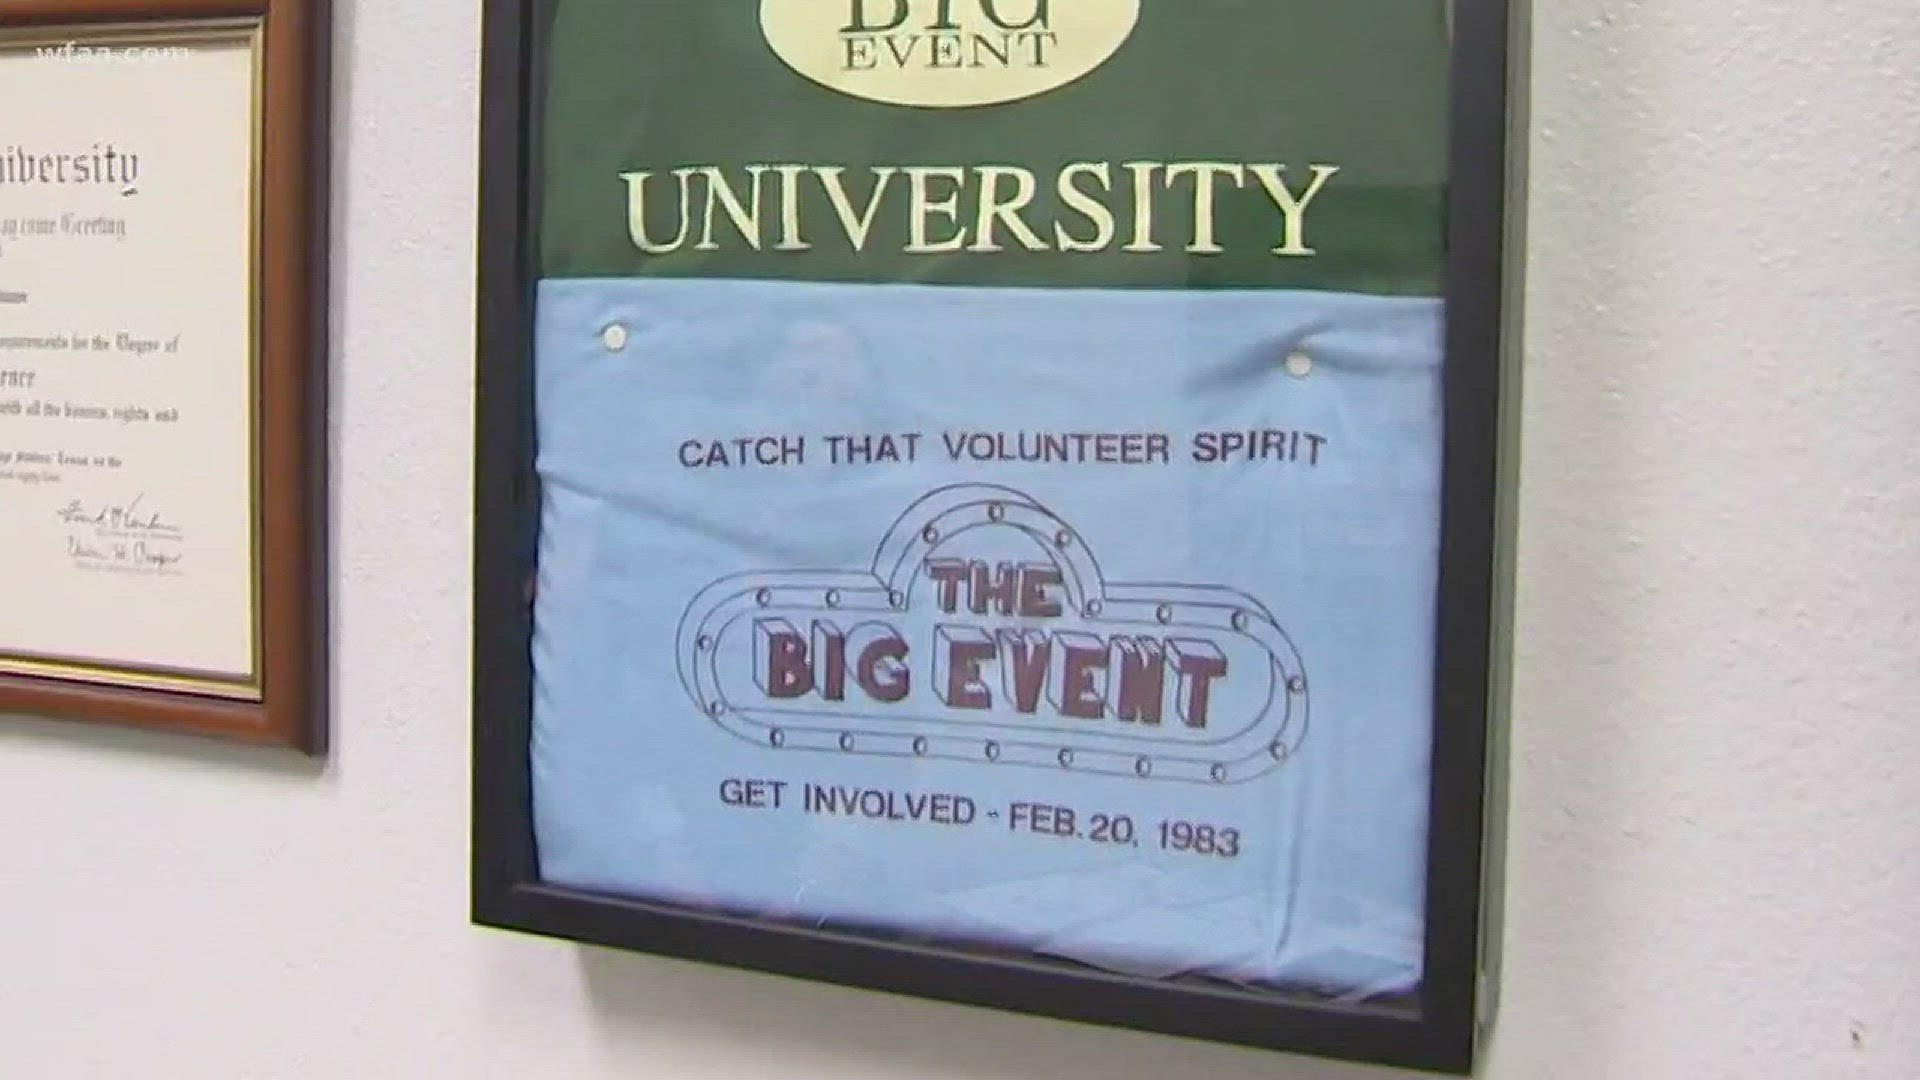 "The Big Event" was founded at Texas A&M in 1983.